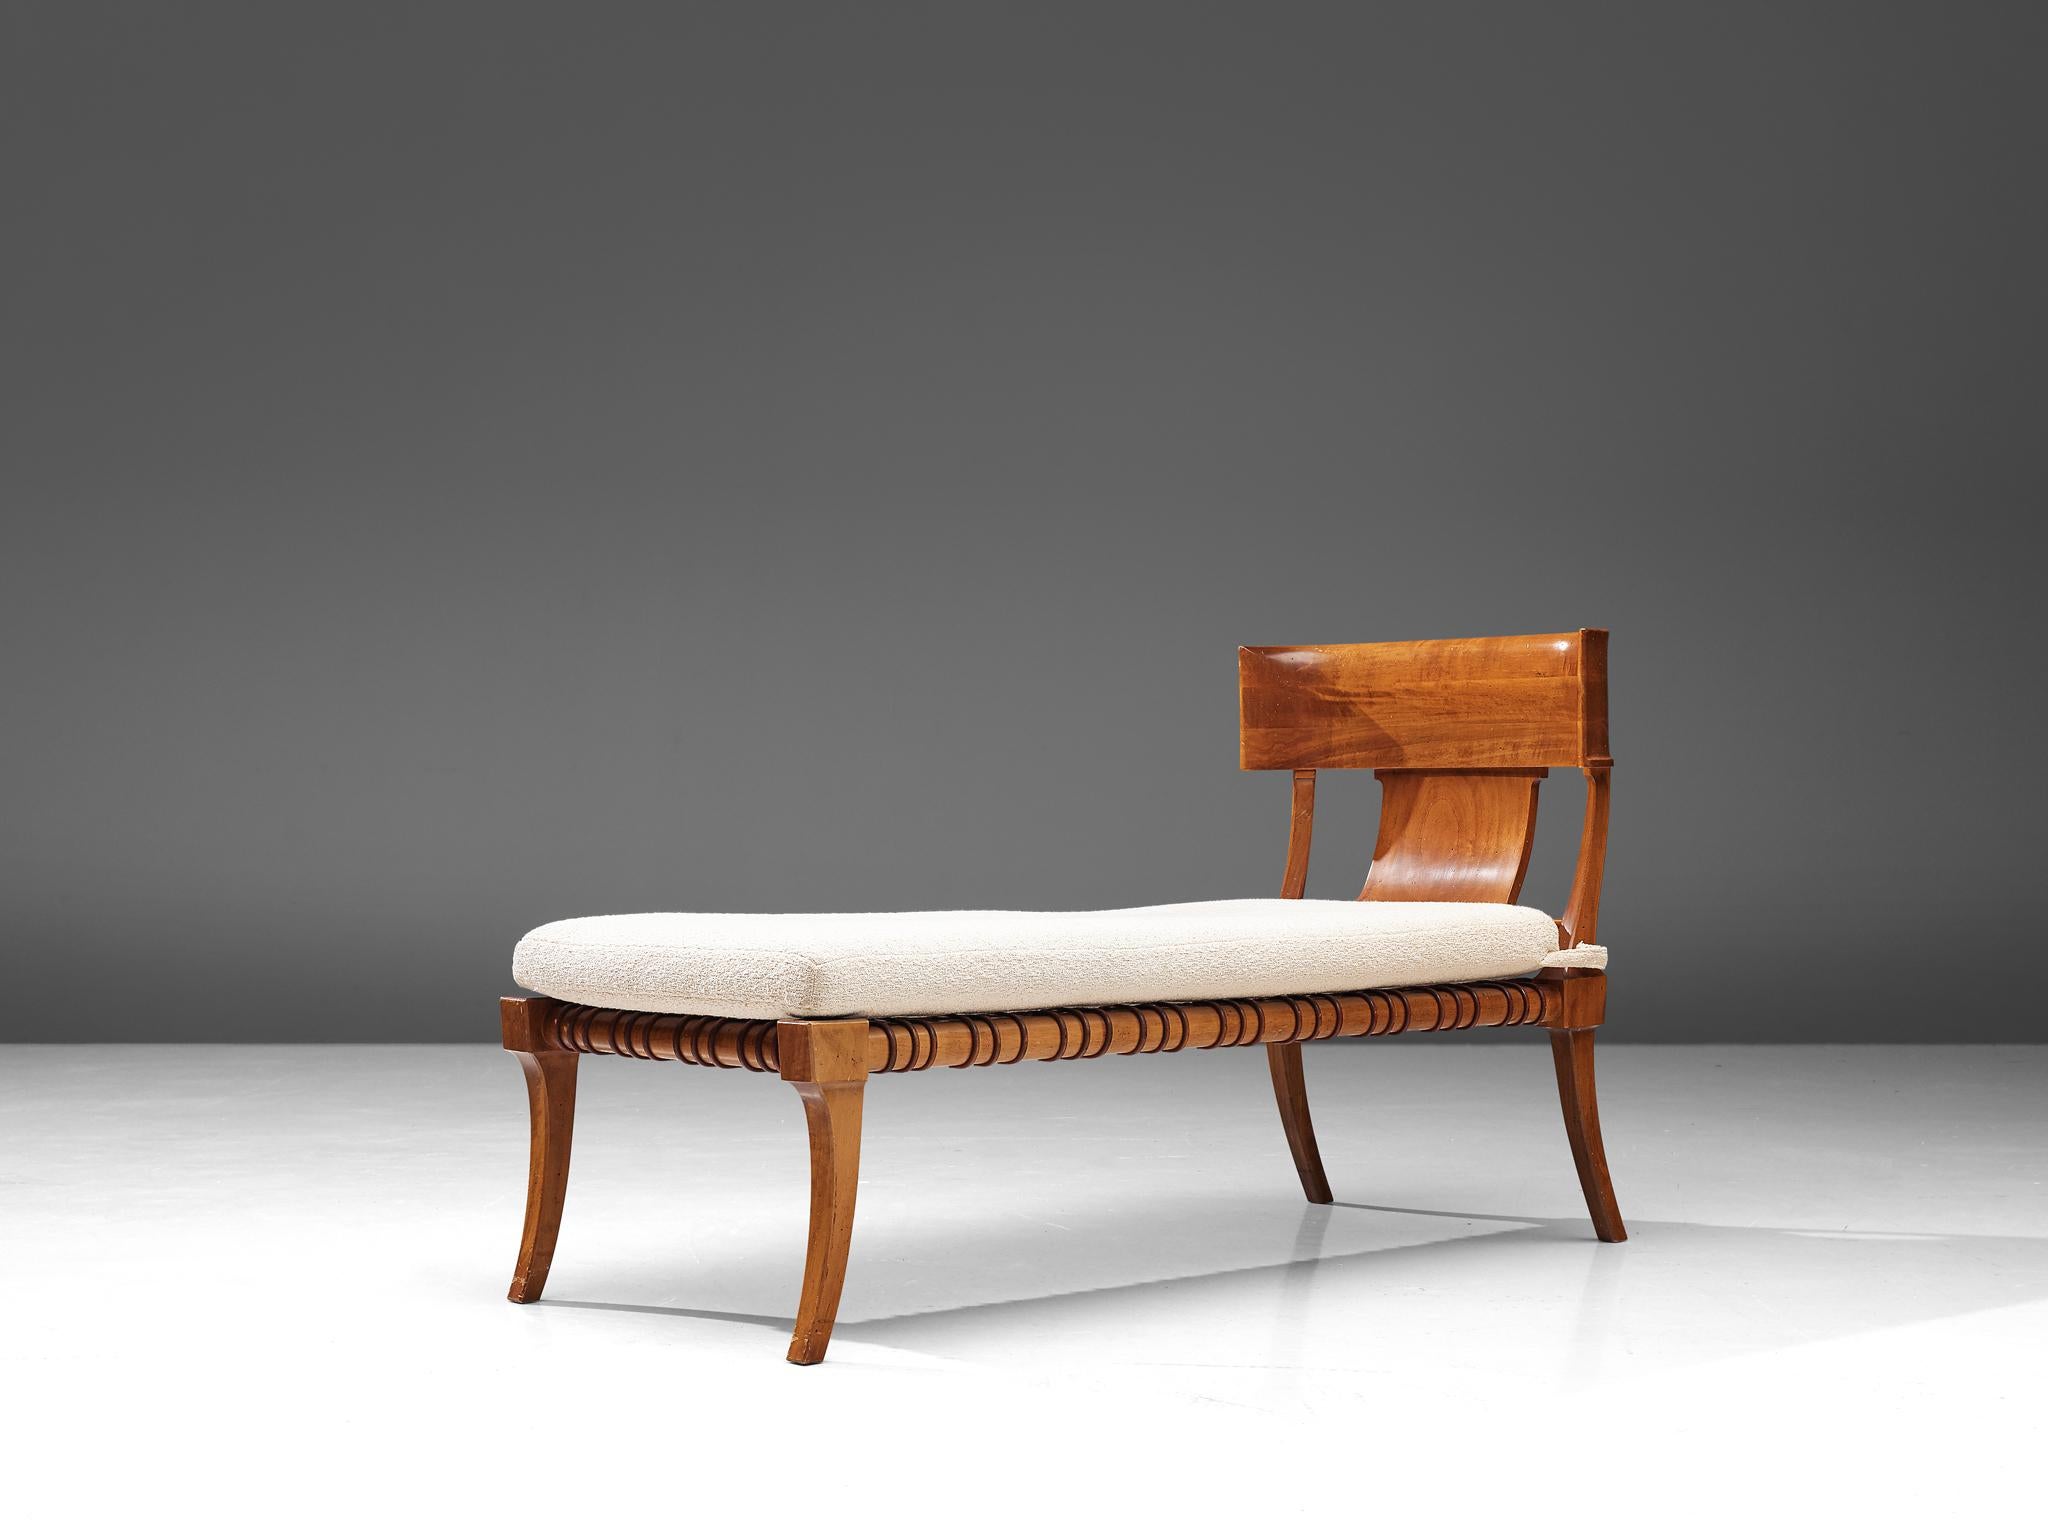 T.H. Robjohn-Gibbings for Saridis of Athens, 'Klini' chaise loungemodel nr. 11, walnut, leather, fabric, United States, 1961

An ancient Greek inspired daybed by the British designer T.H. Robjohn Gibbings. This chaise lounge was part of the